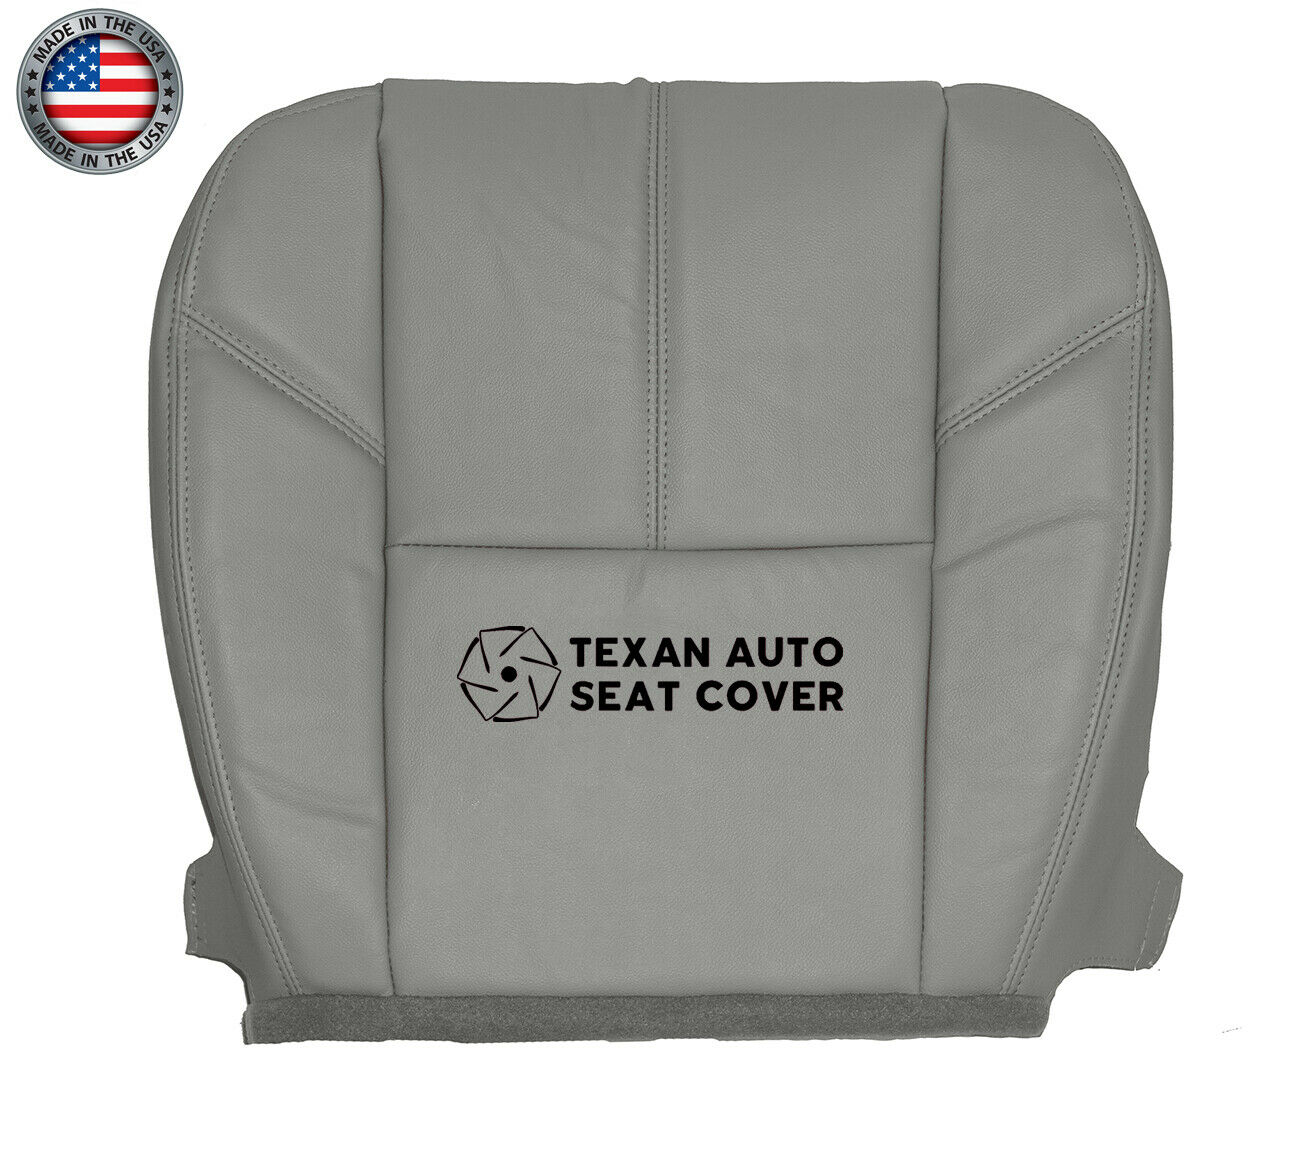 2007, 2008, 2009, 2010, 2011, 2012, 2013, 2014 Chevy Silverado 1500, 2500HD, 3500HD LT, LS, LTZ, Z71 Driver Bottom Leather Replacement Seat Cover Gray